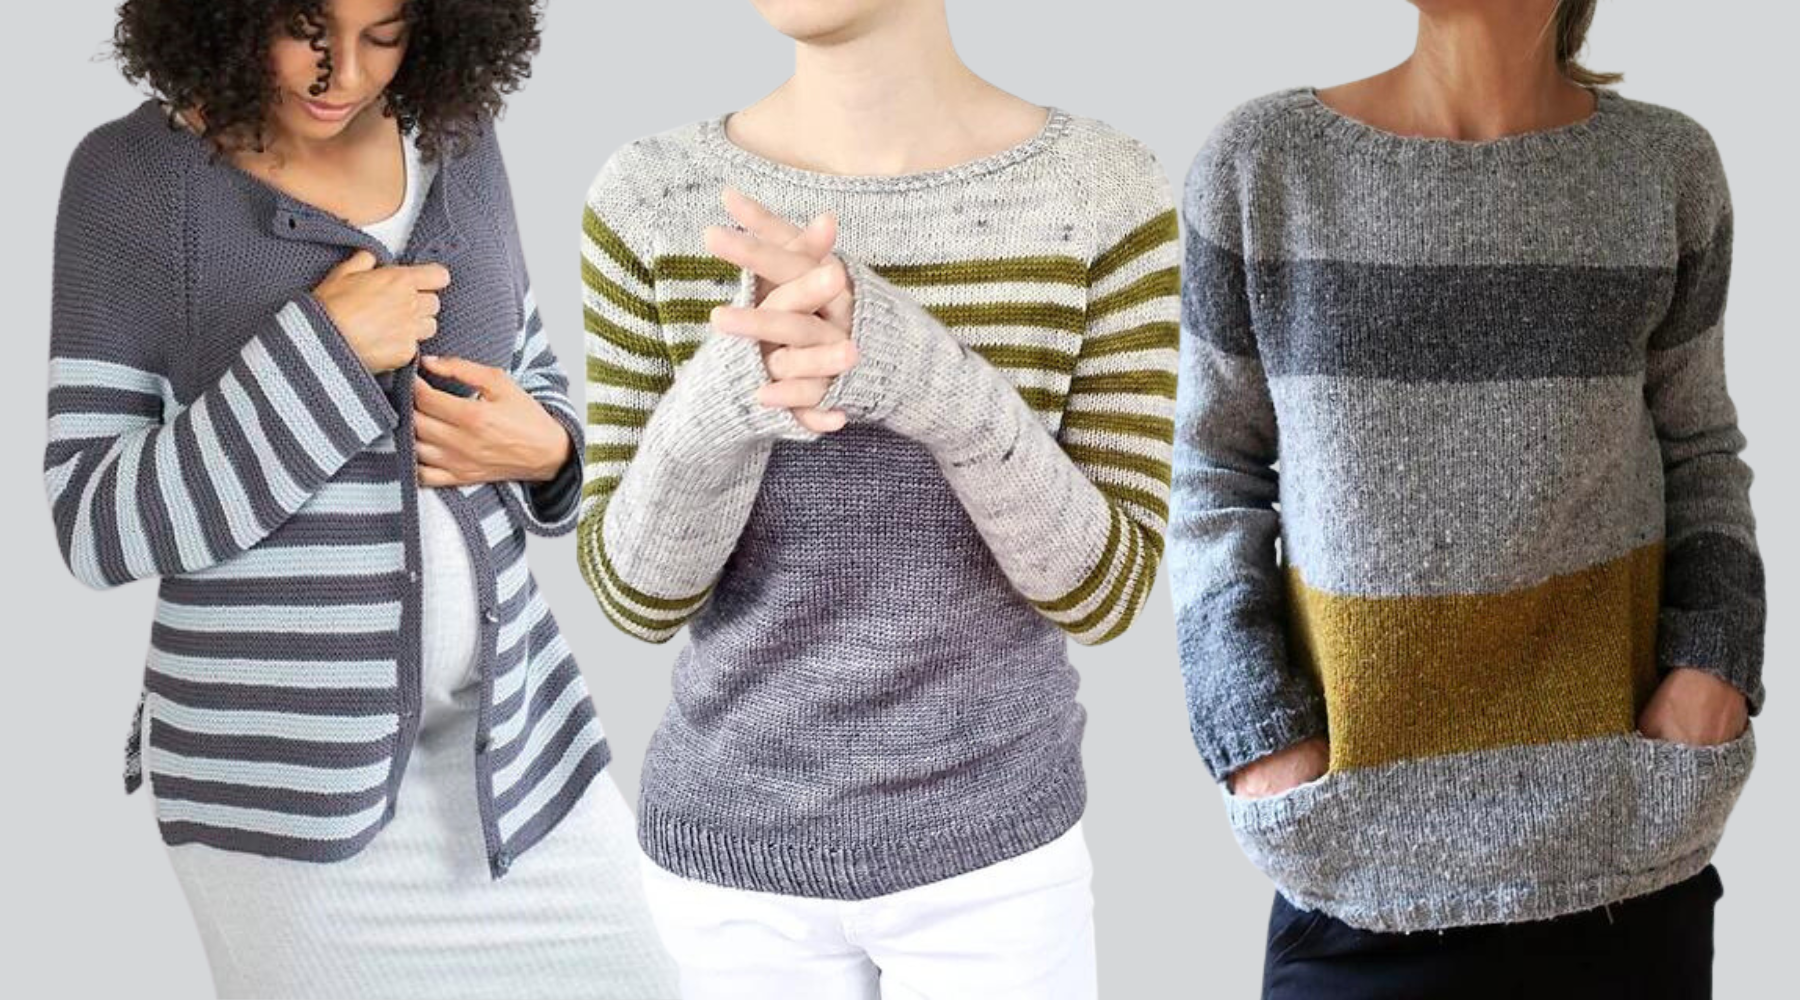 You can wear stripes - go ahead and knit the striped sweater